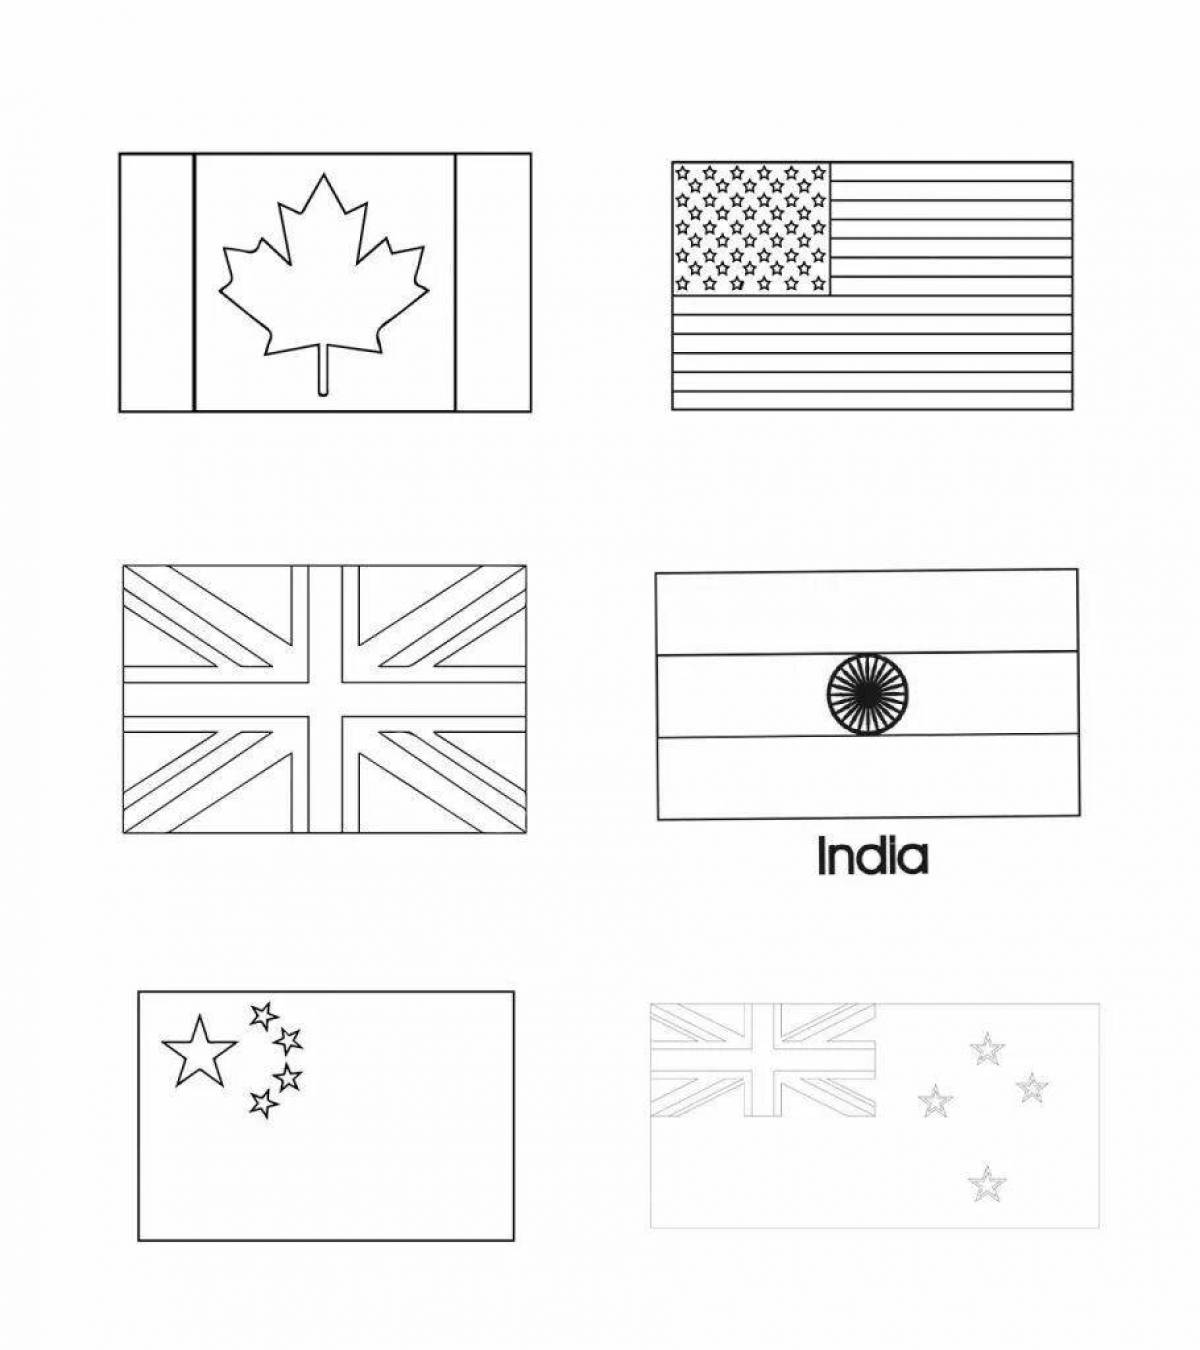 Great flags of the world for schoolchildren